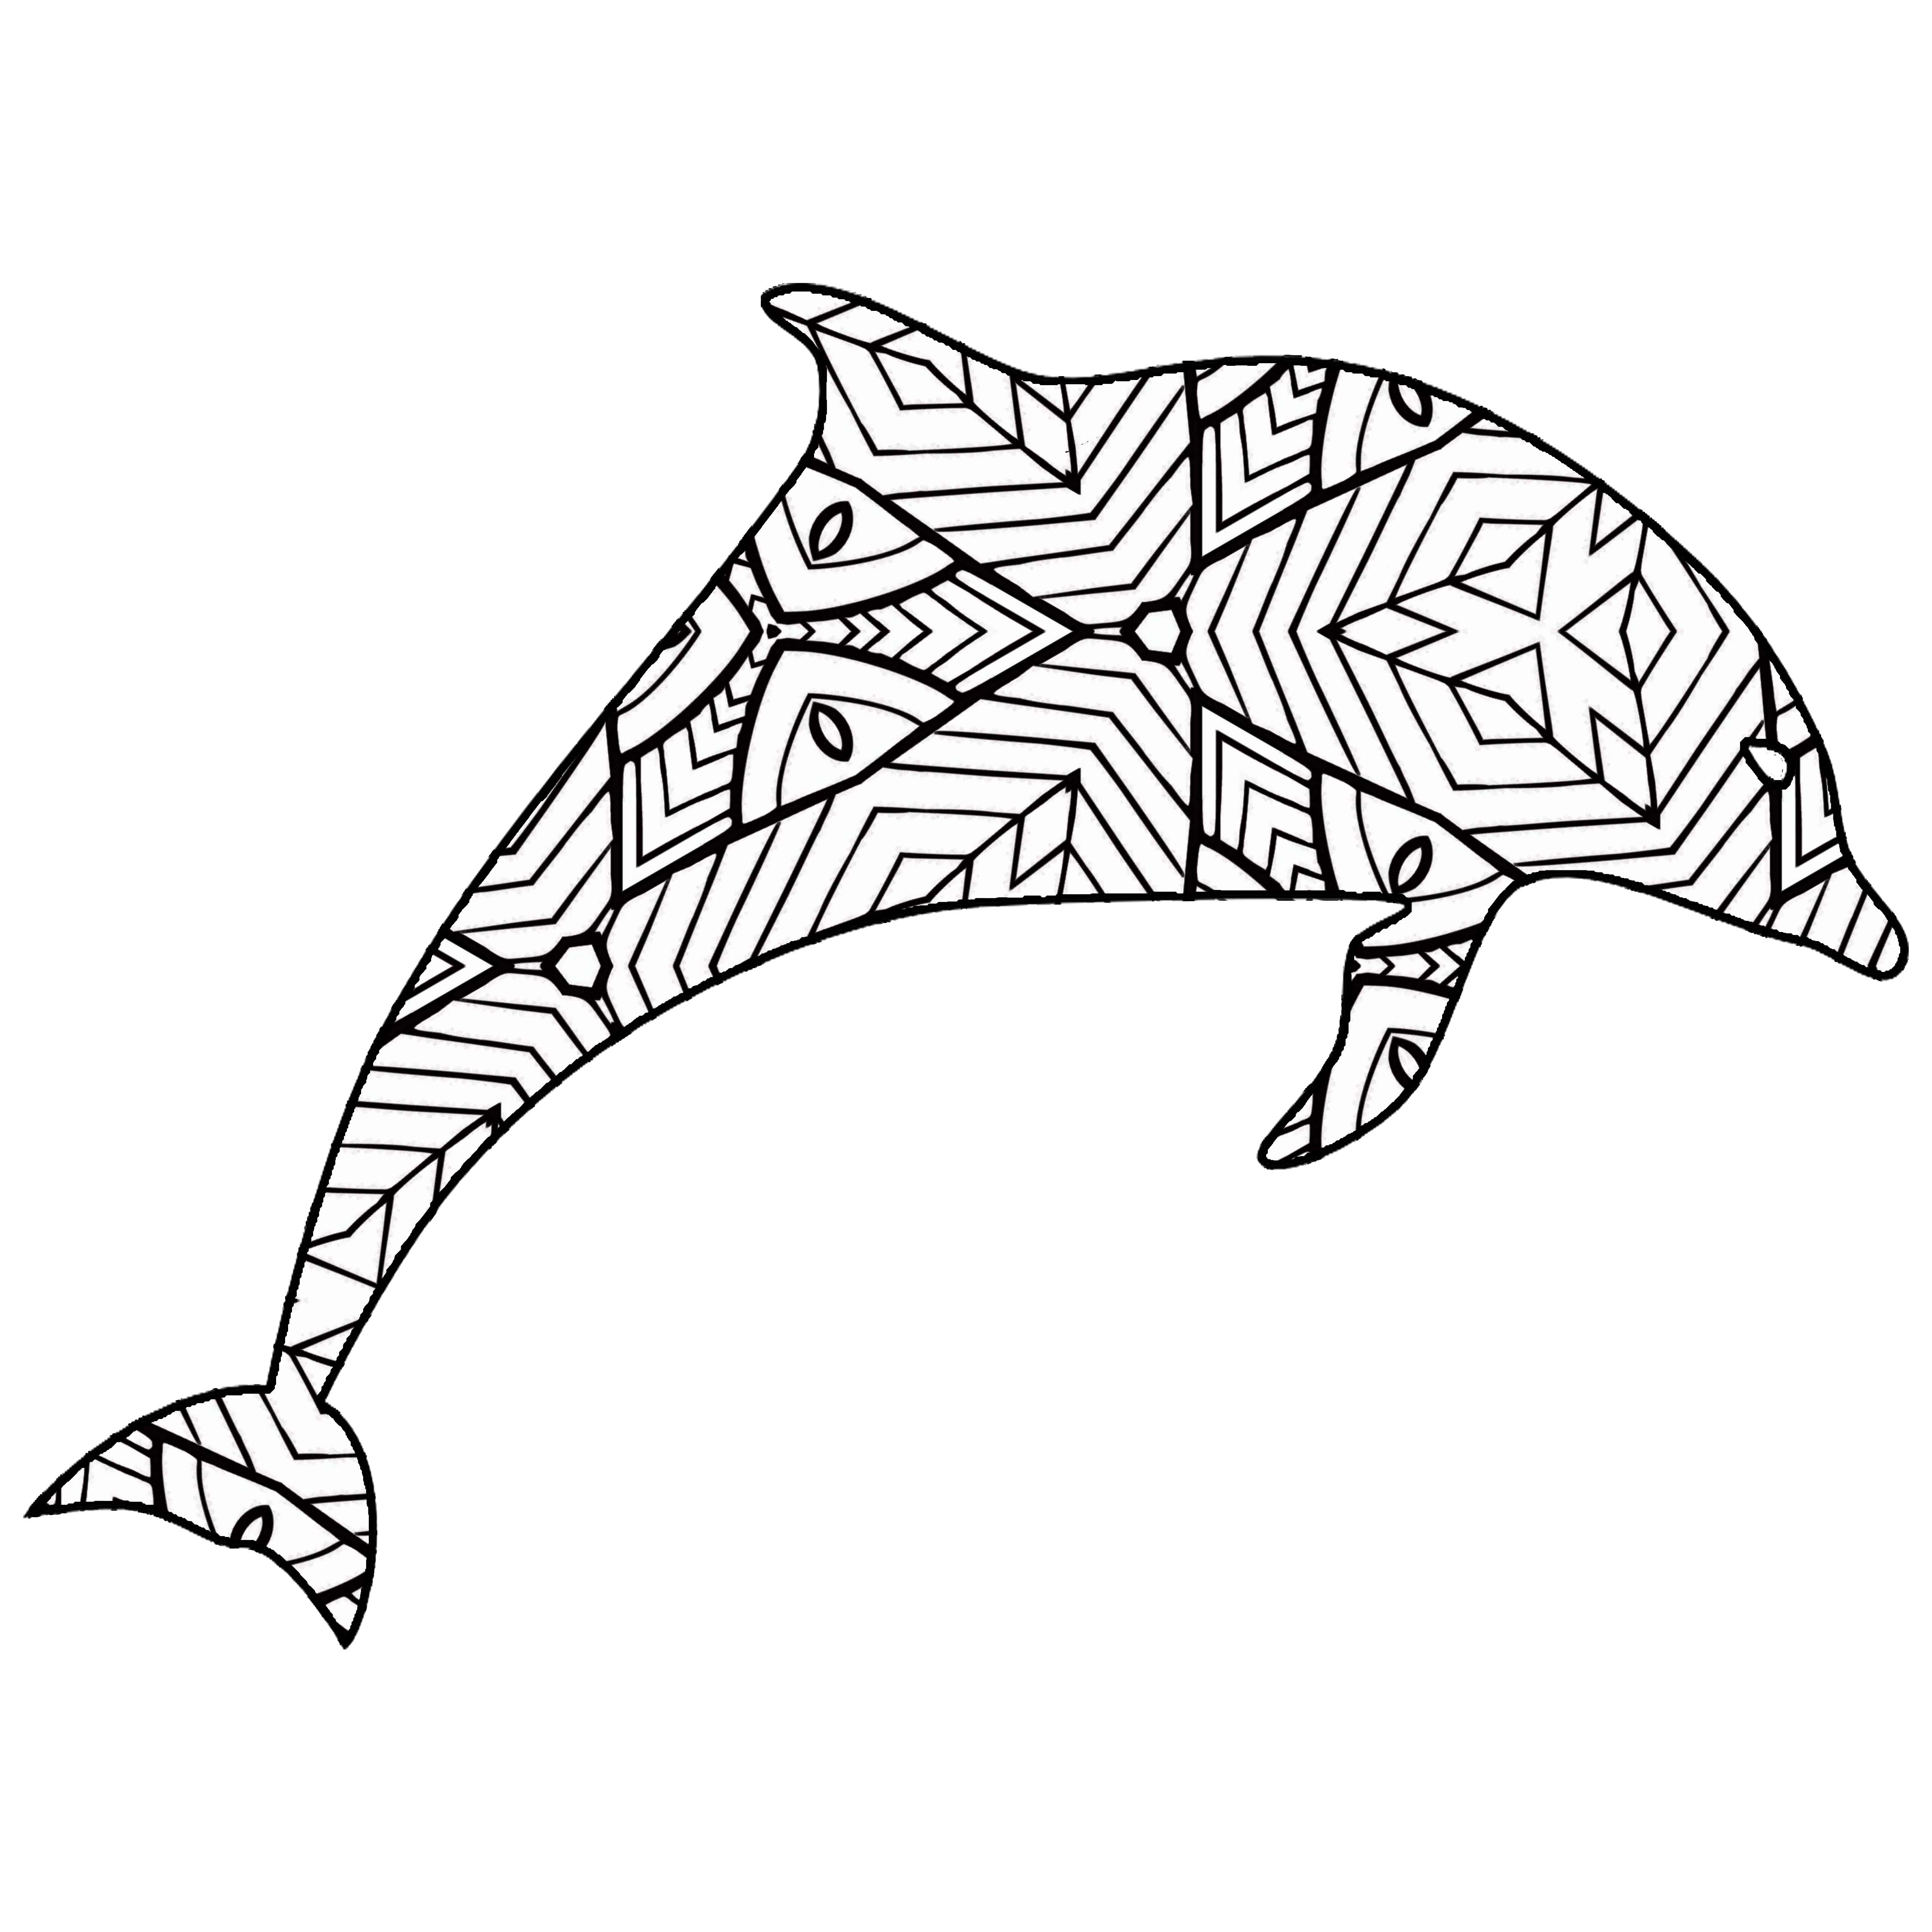 Download 30 Free Printable Geometric Animal Coloring Pages | The ...